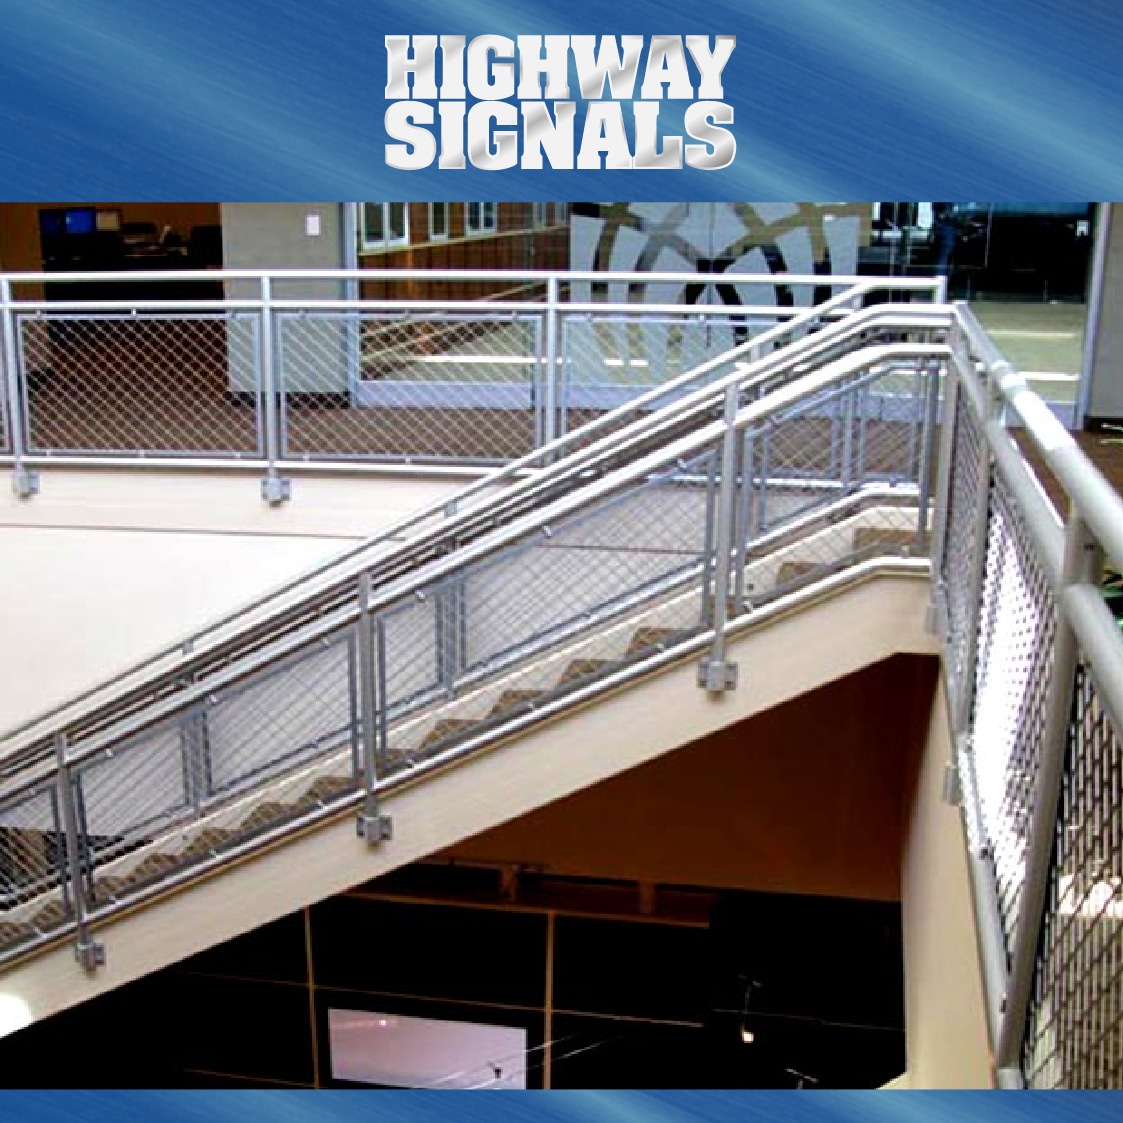 Aluminium Handrail Used To Cover An Escalator And Fence In Mall